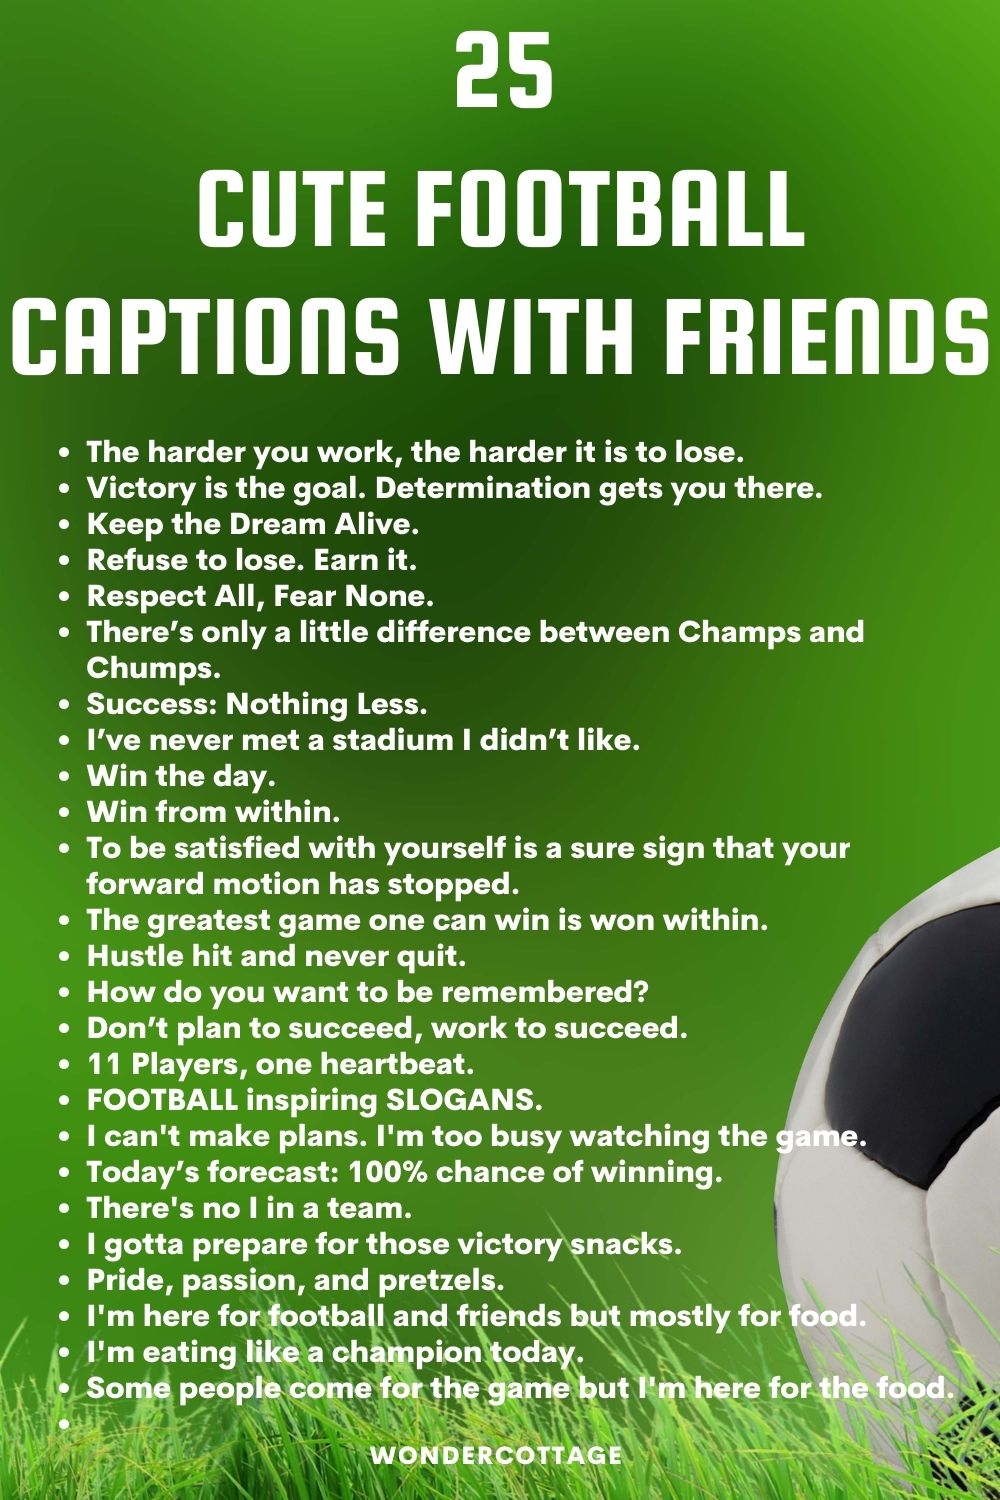 Cute Football Captions With Friends